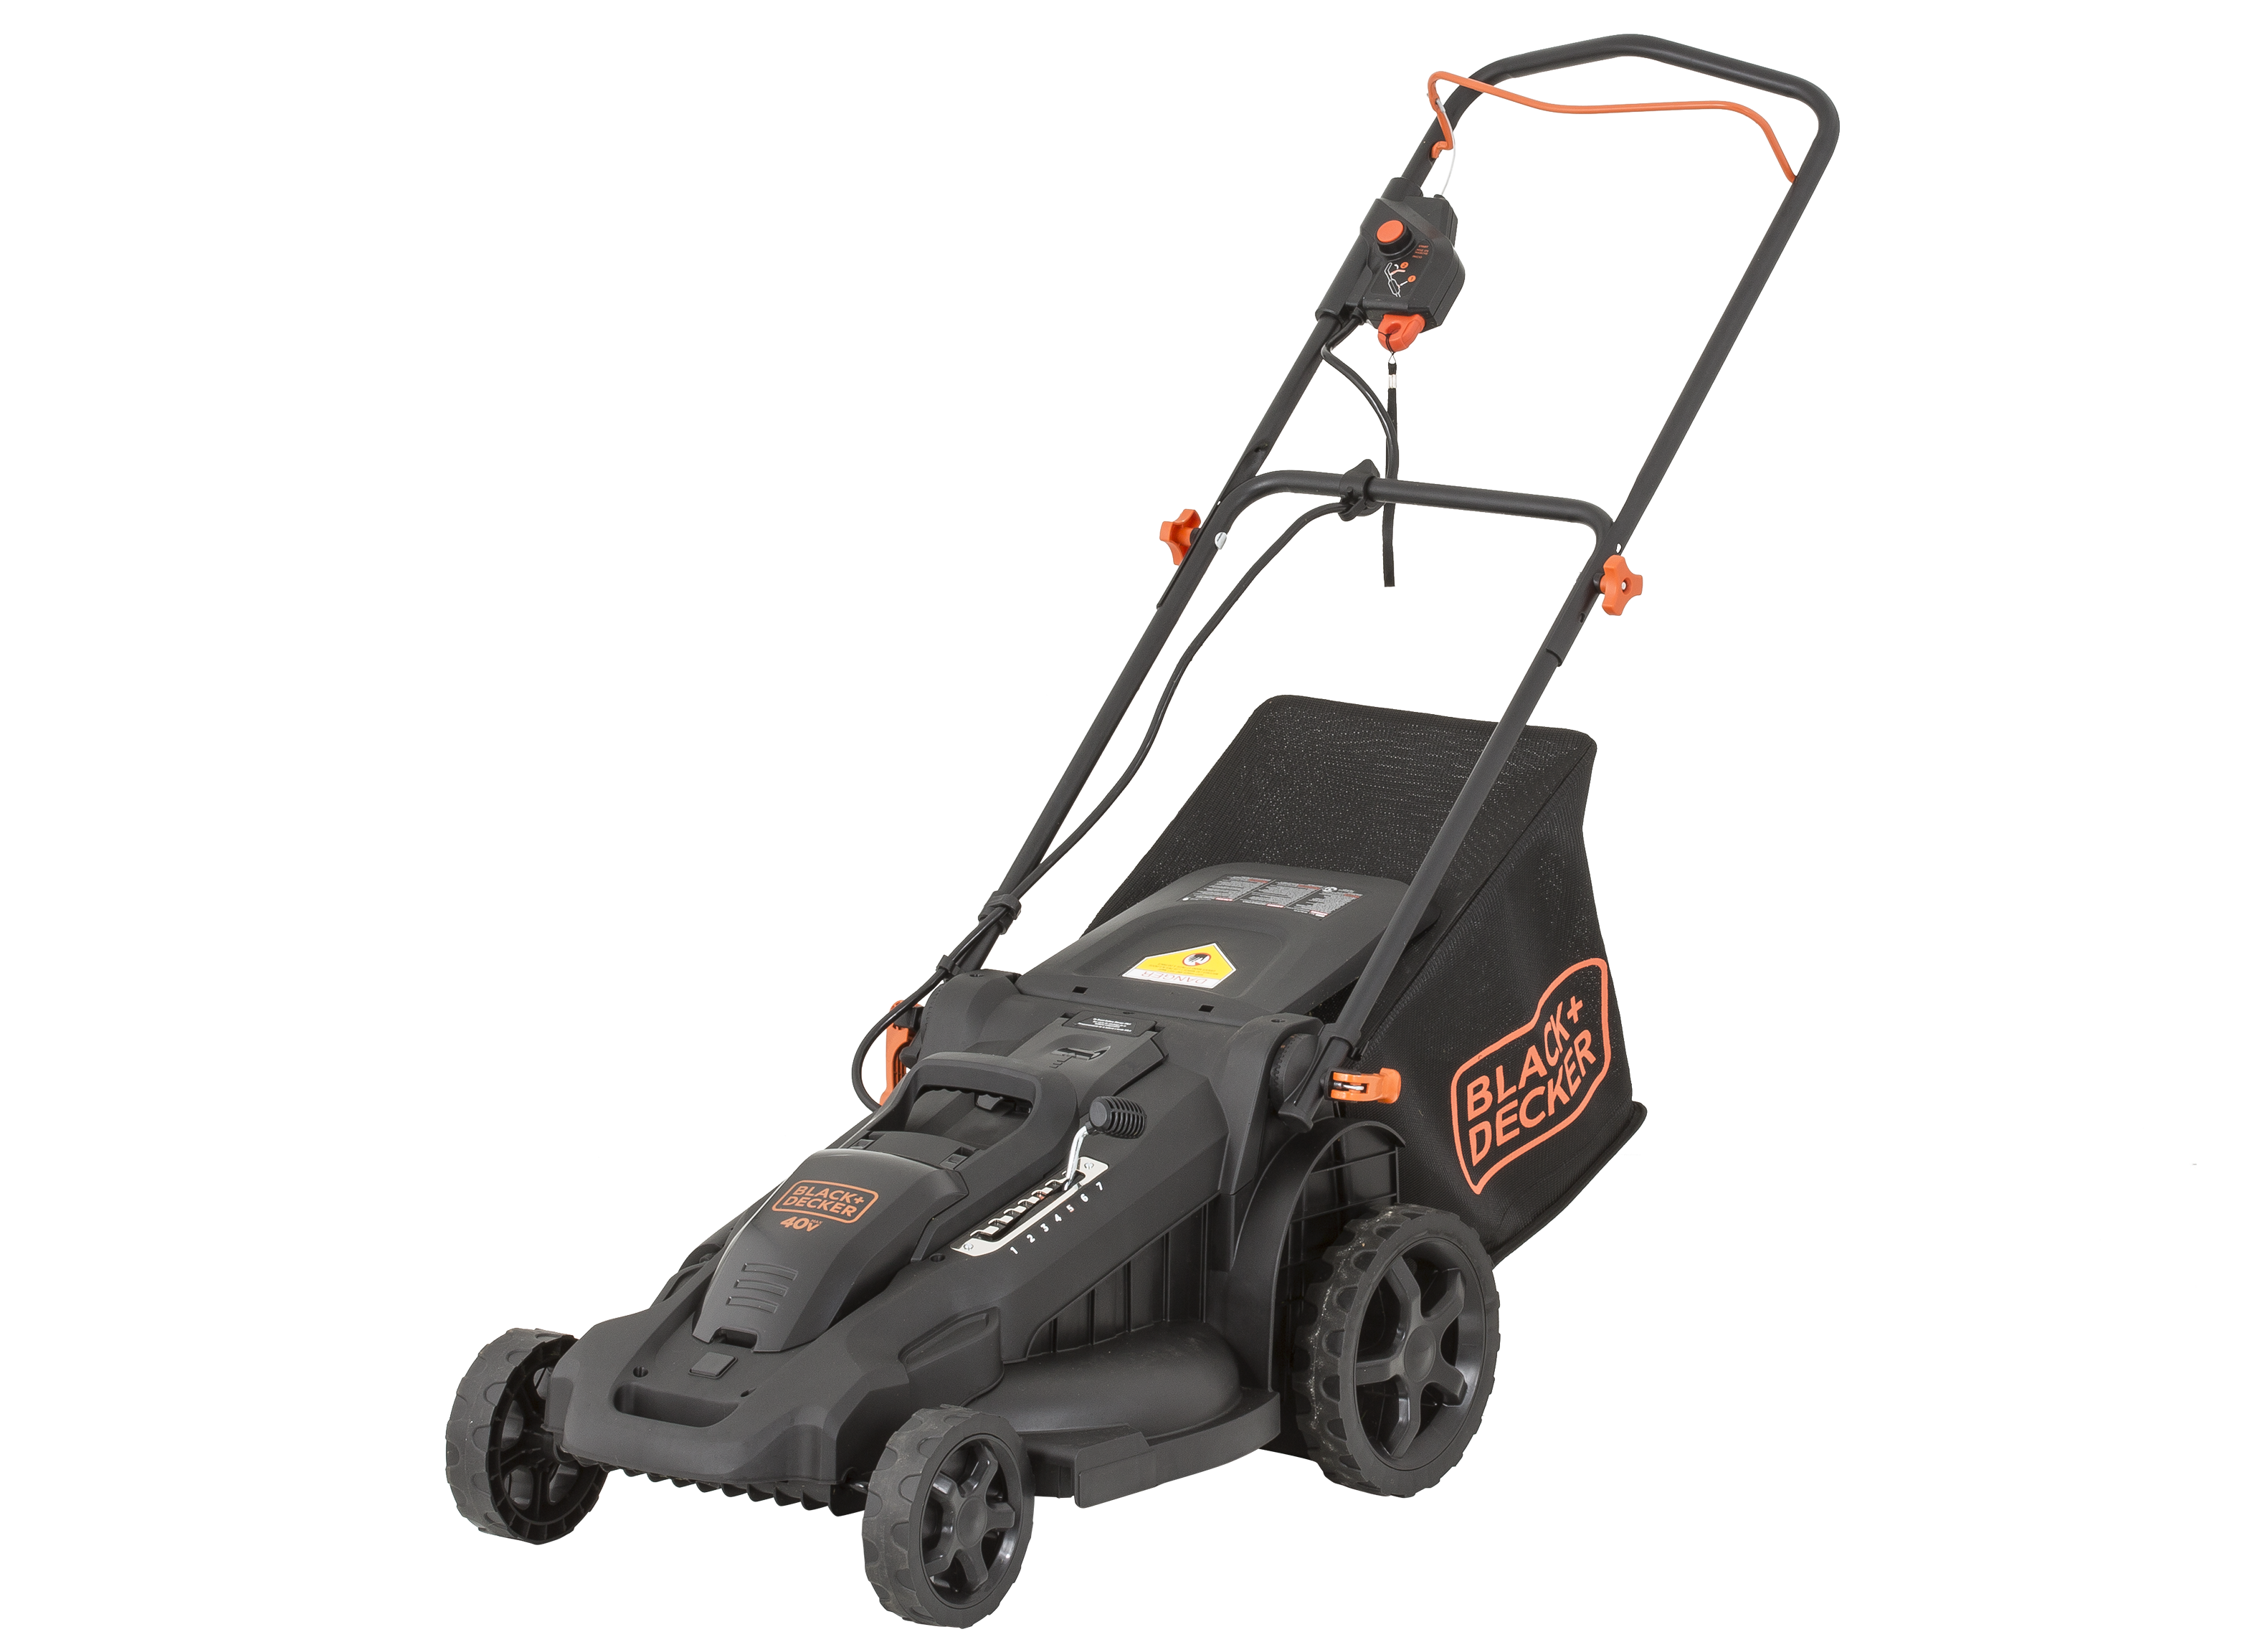 https://crdms.images.consumerreports.org/prod/products/cr/models/388376-pushmowers-blackdecker-cm2045.png